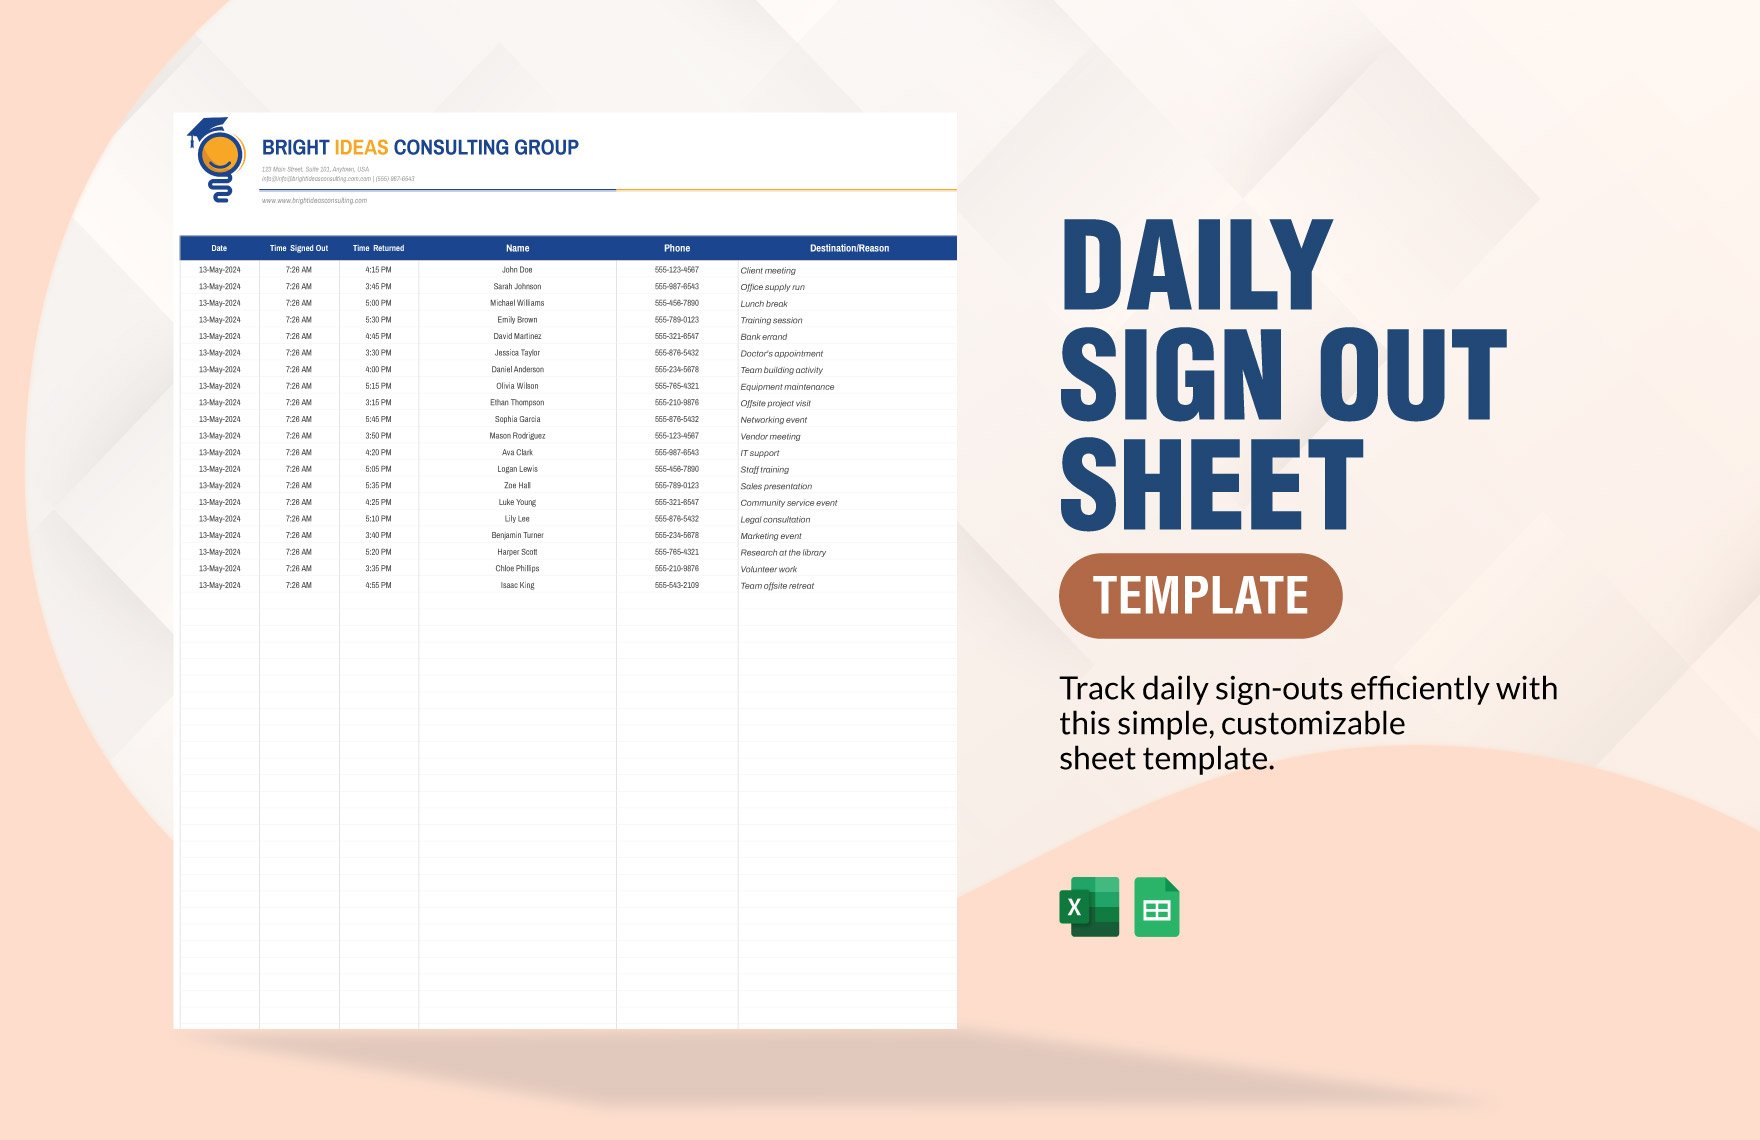 Daily Sign Out Sheet Template